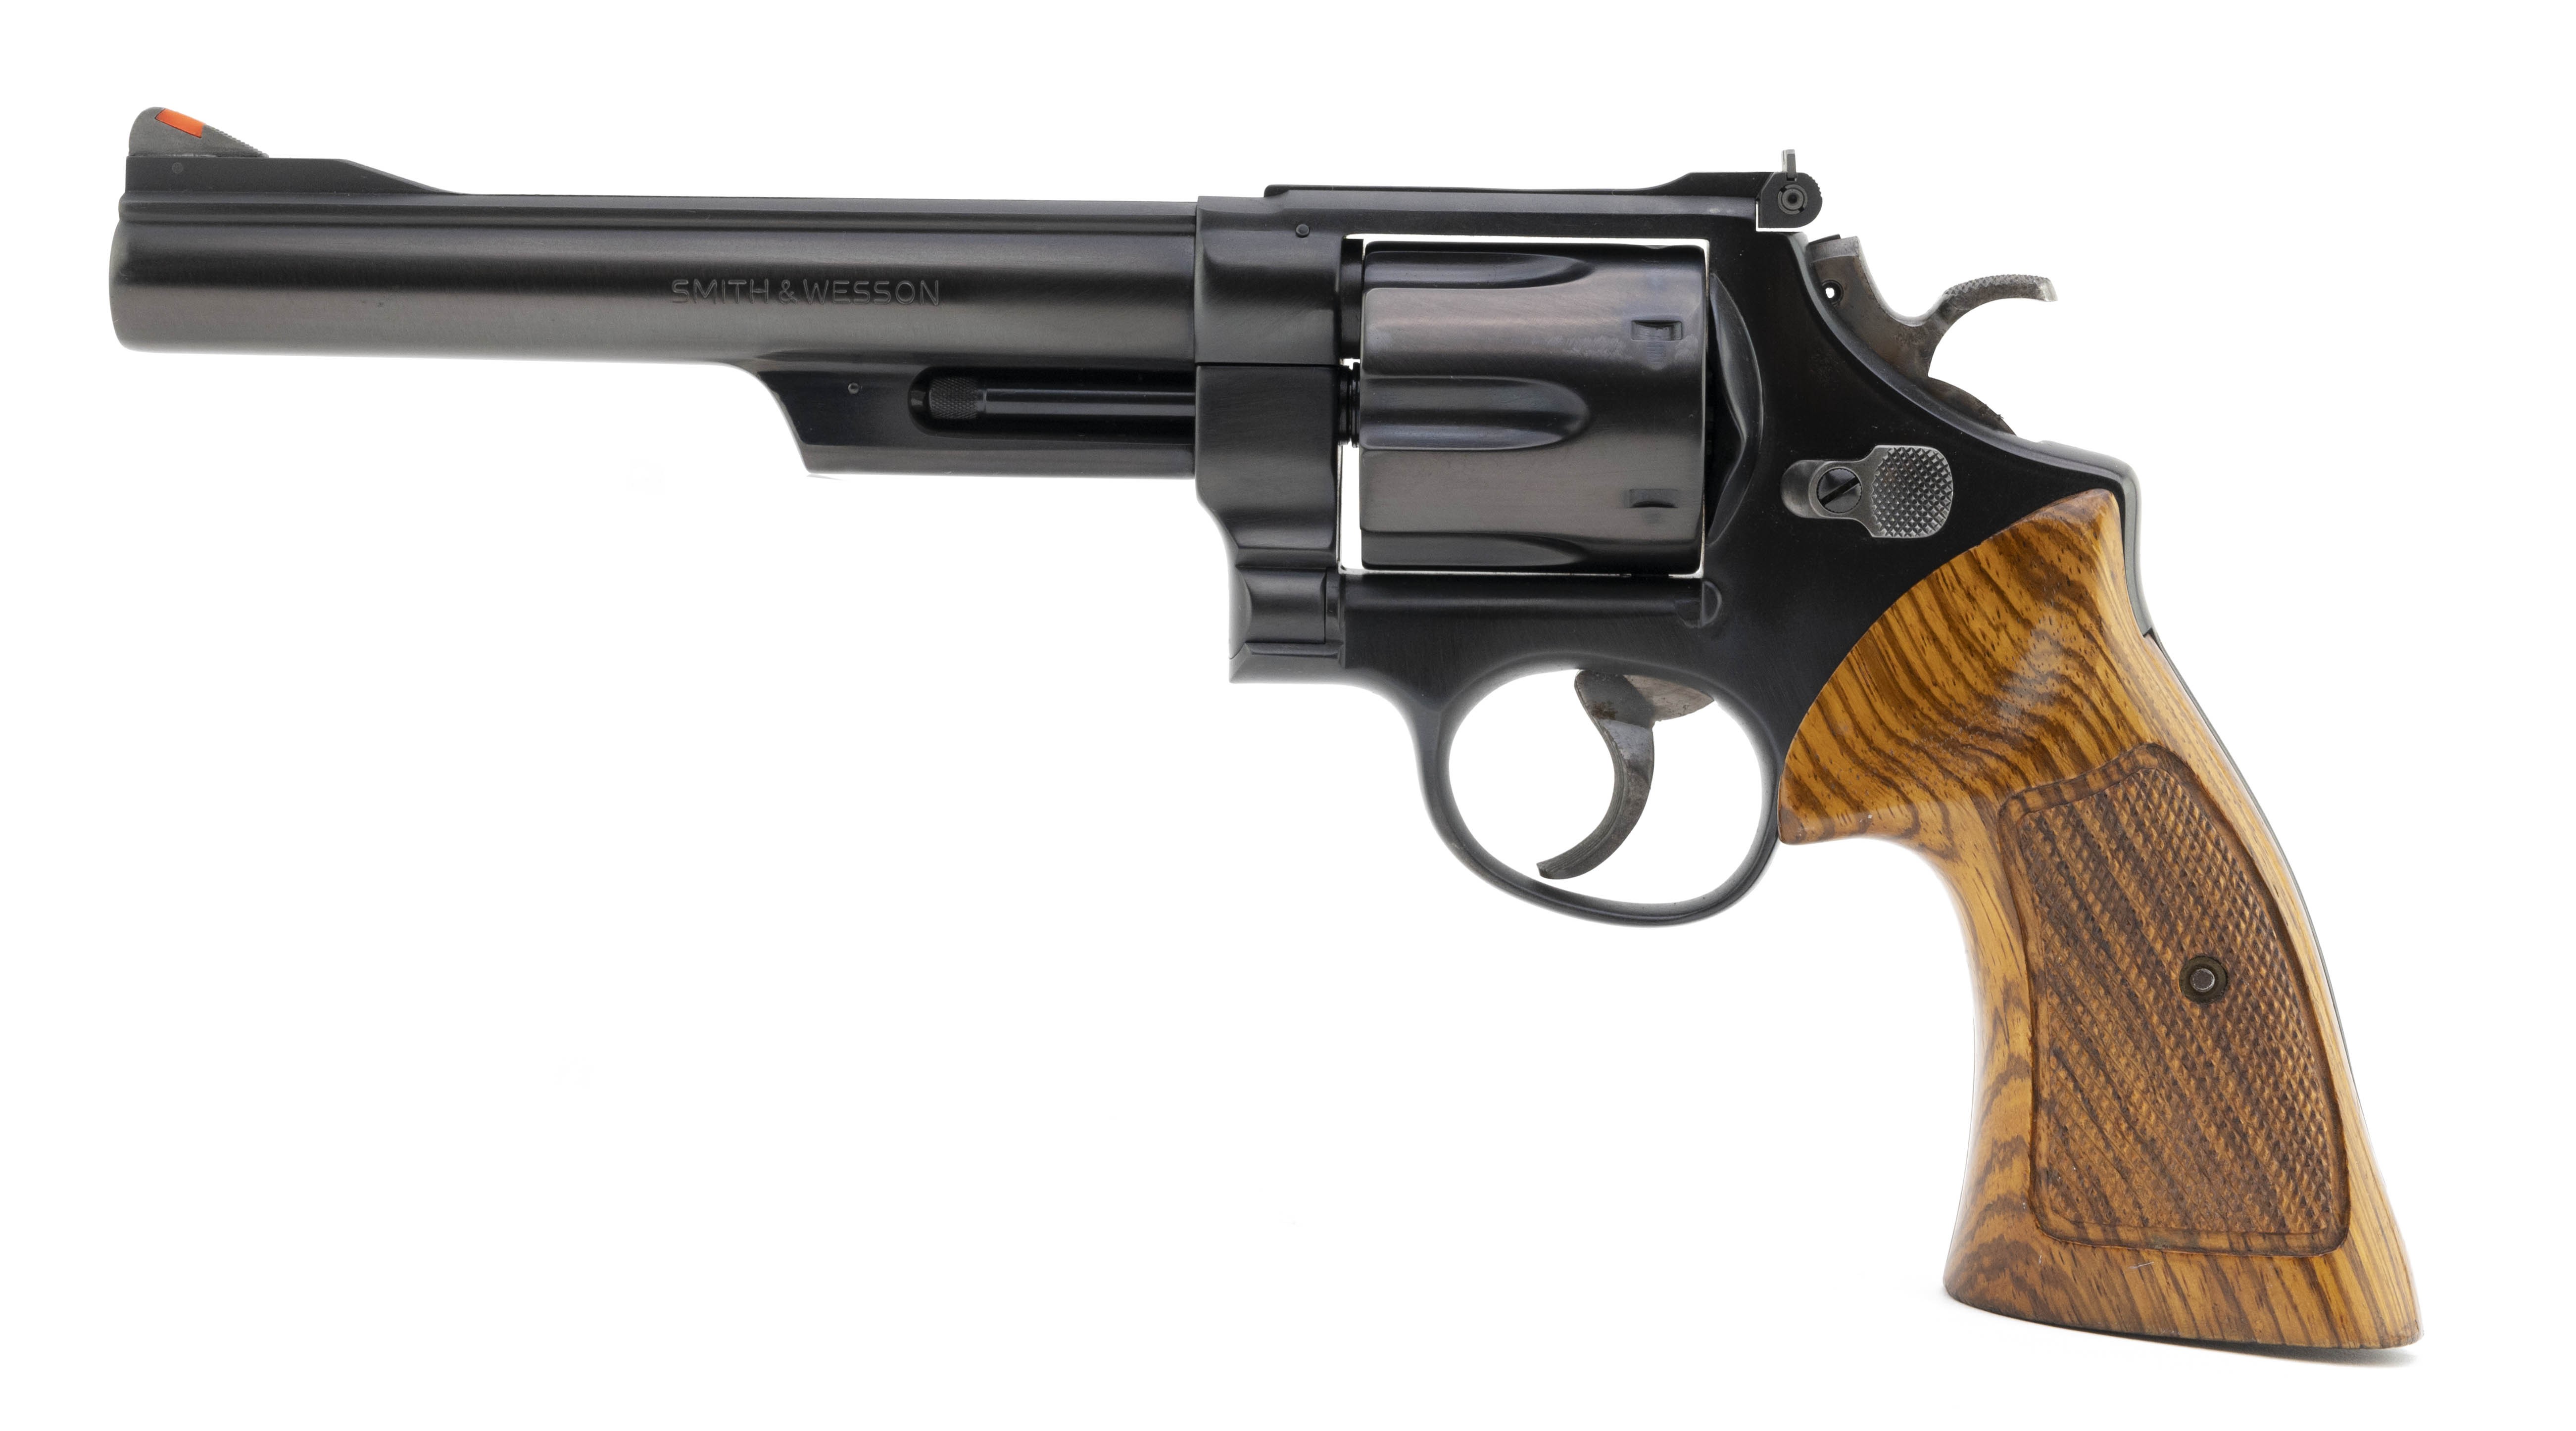 Weapons Guns Guns And Ammo Taurus Smith And Wesson Revolvers | My XXX ...